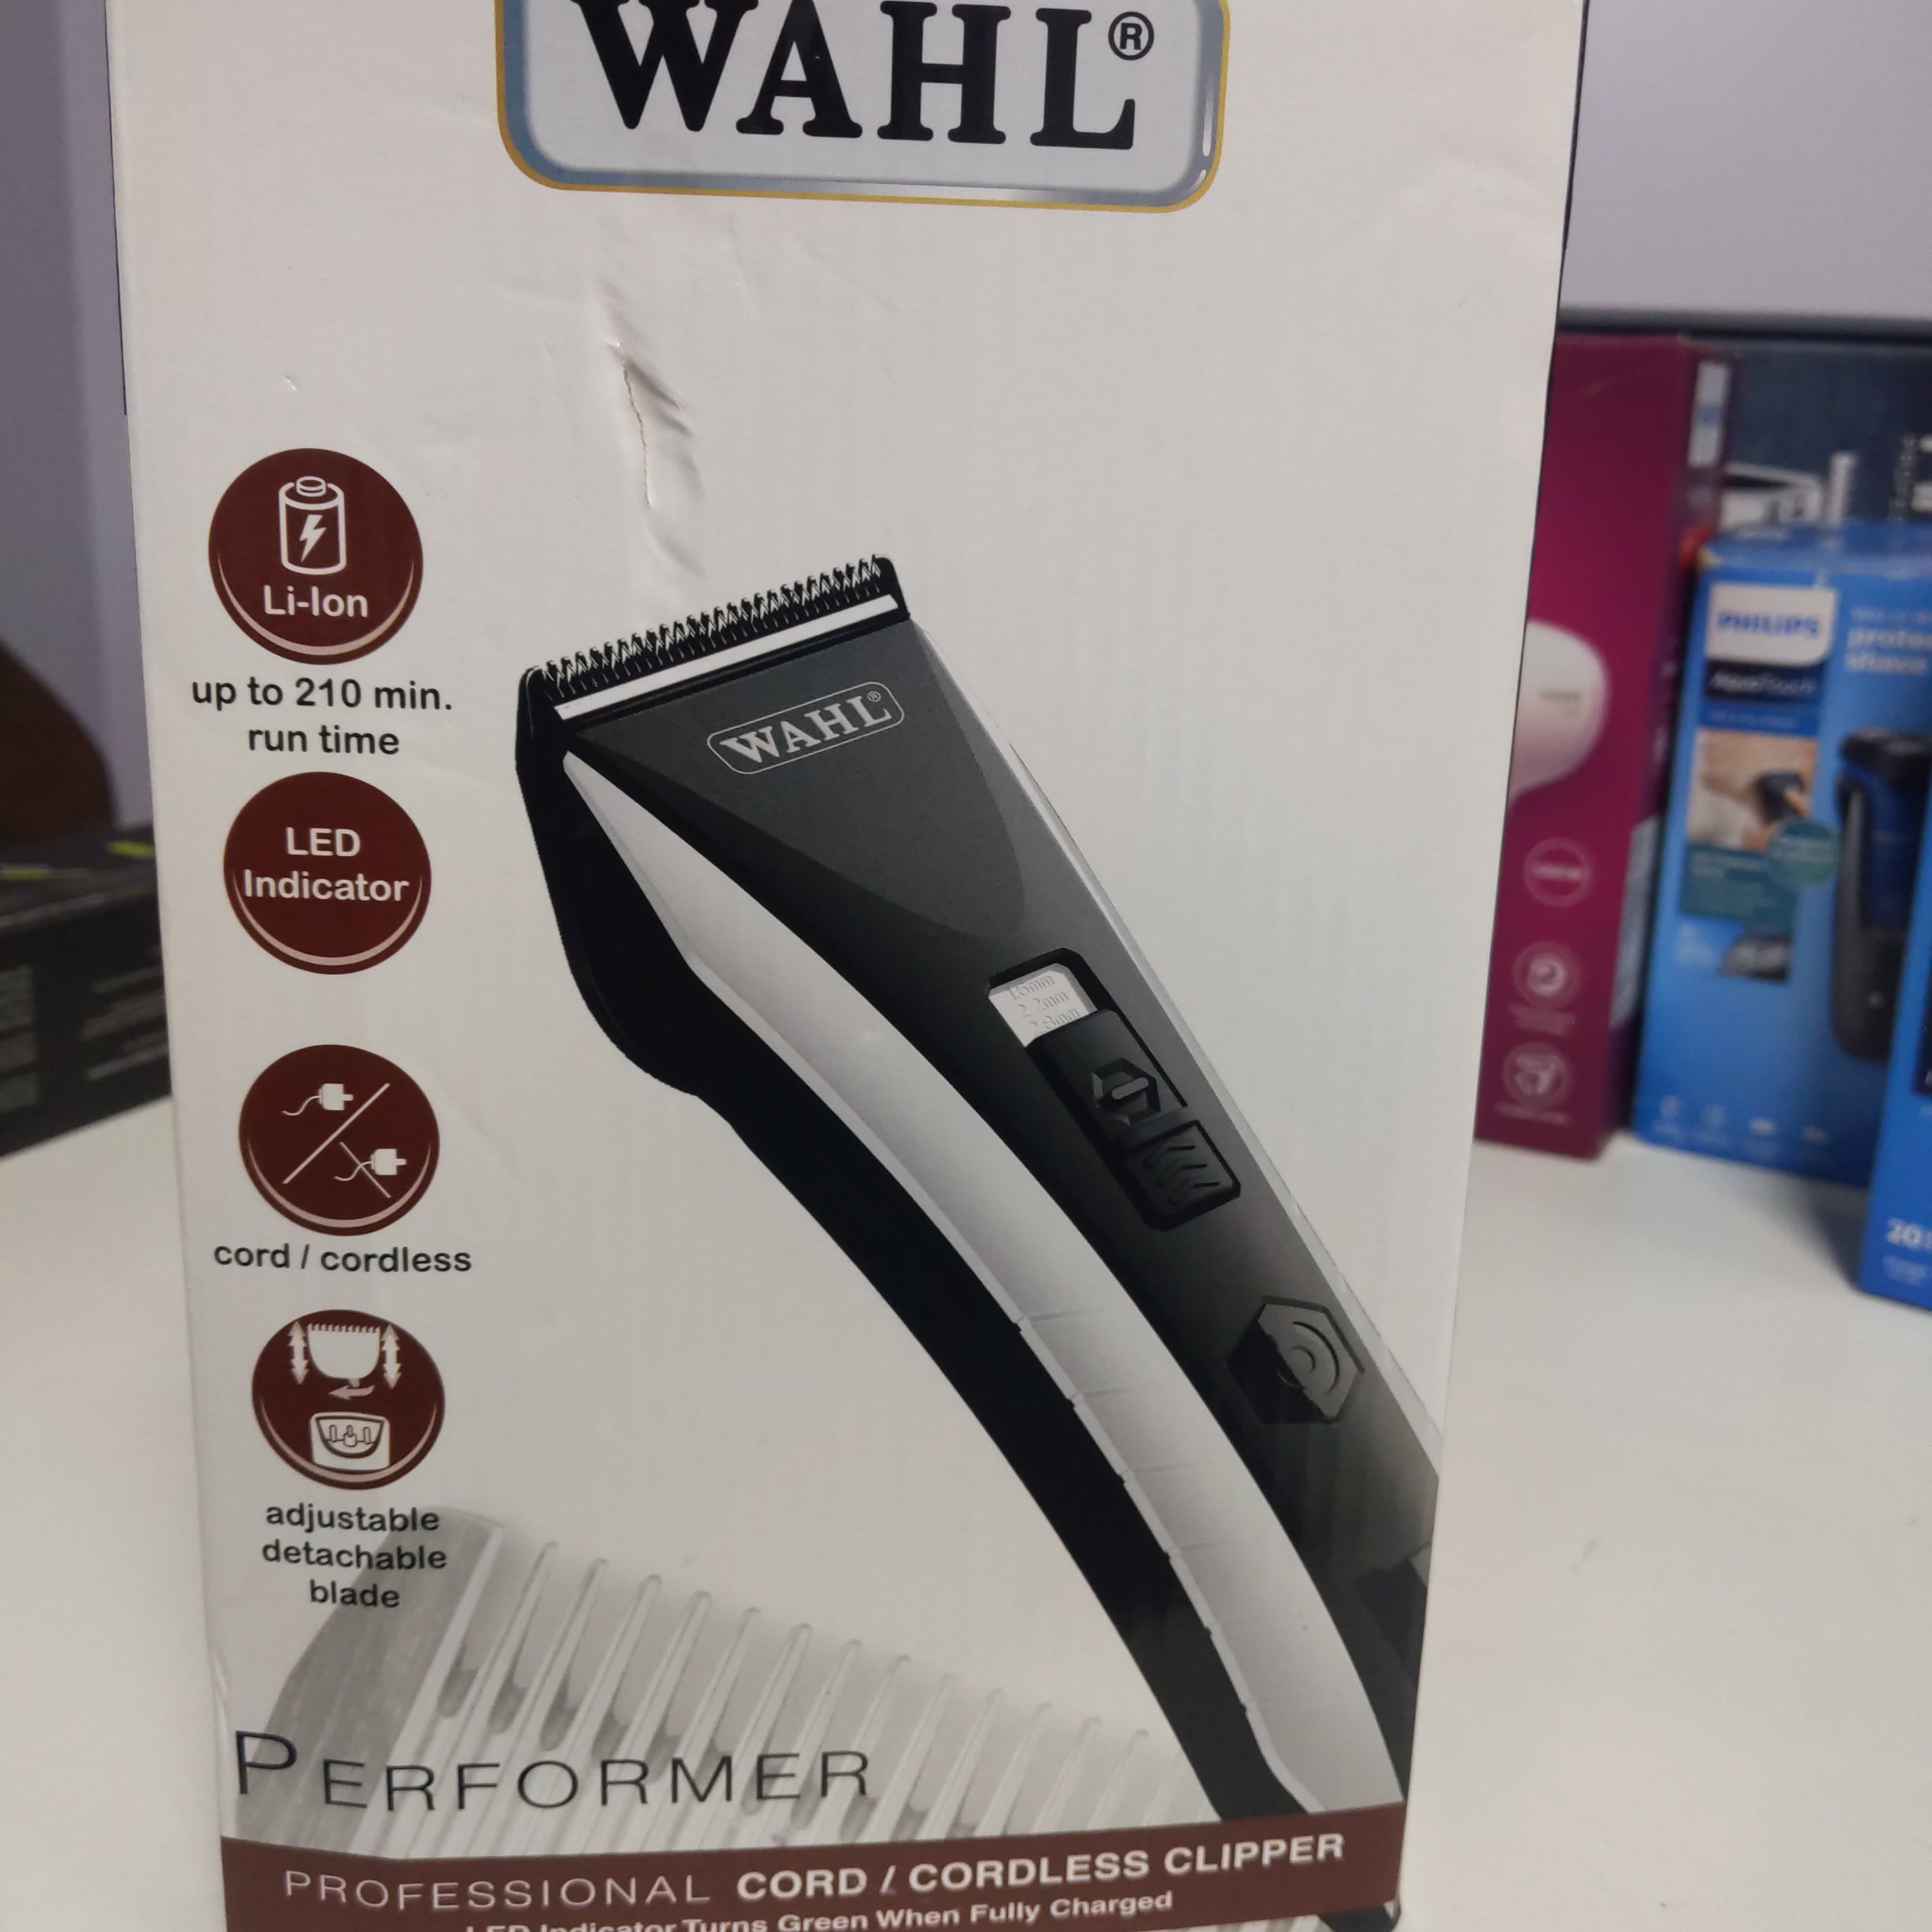 Wahl professional perfomer cordless clipper